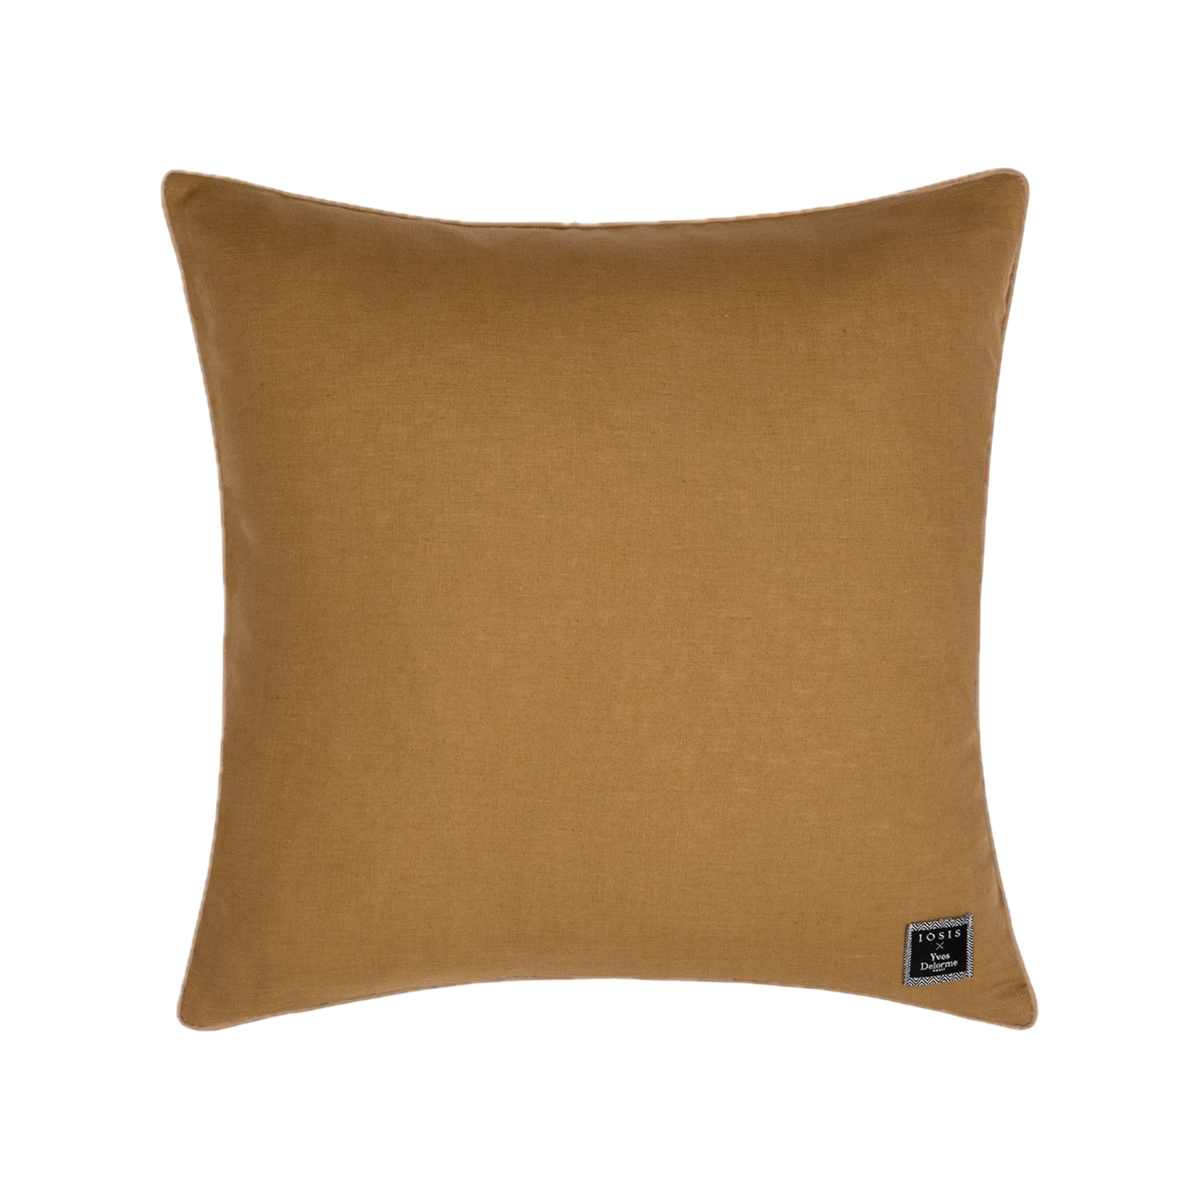 Back Side of Yves Delorme Golestan Decorative Pillow in Sienna Color